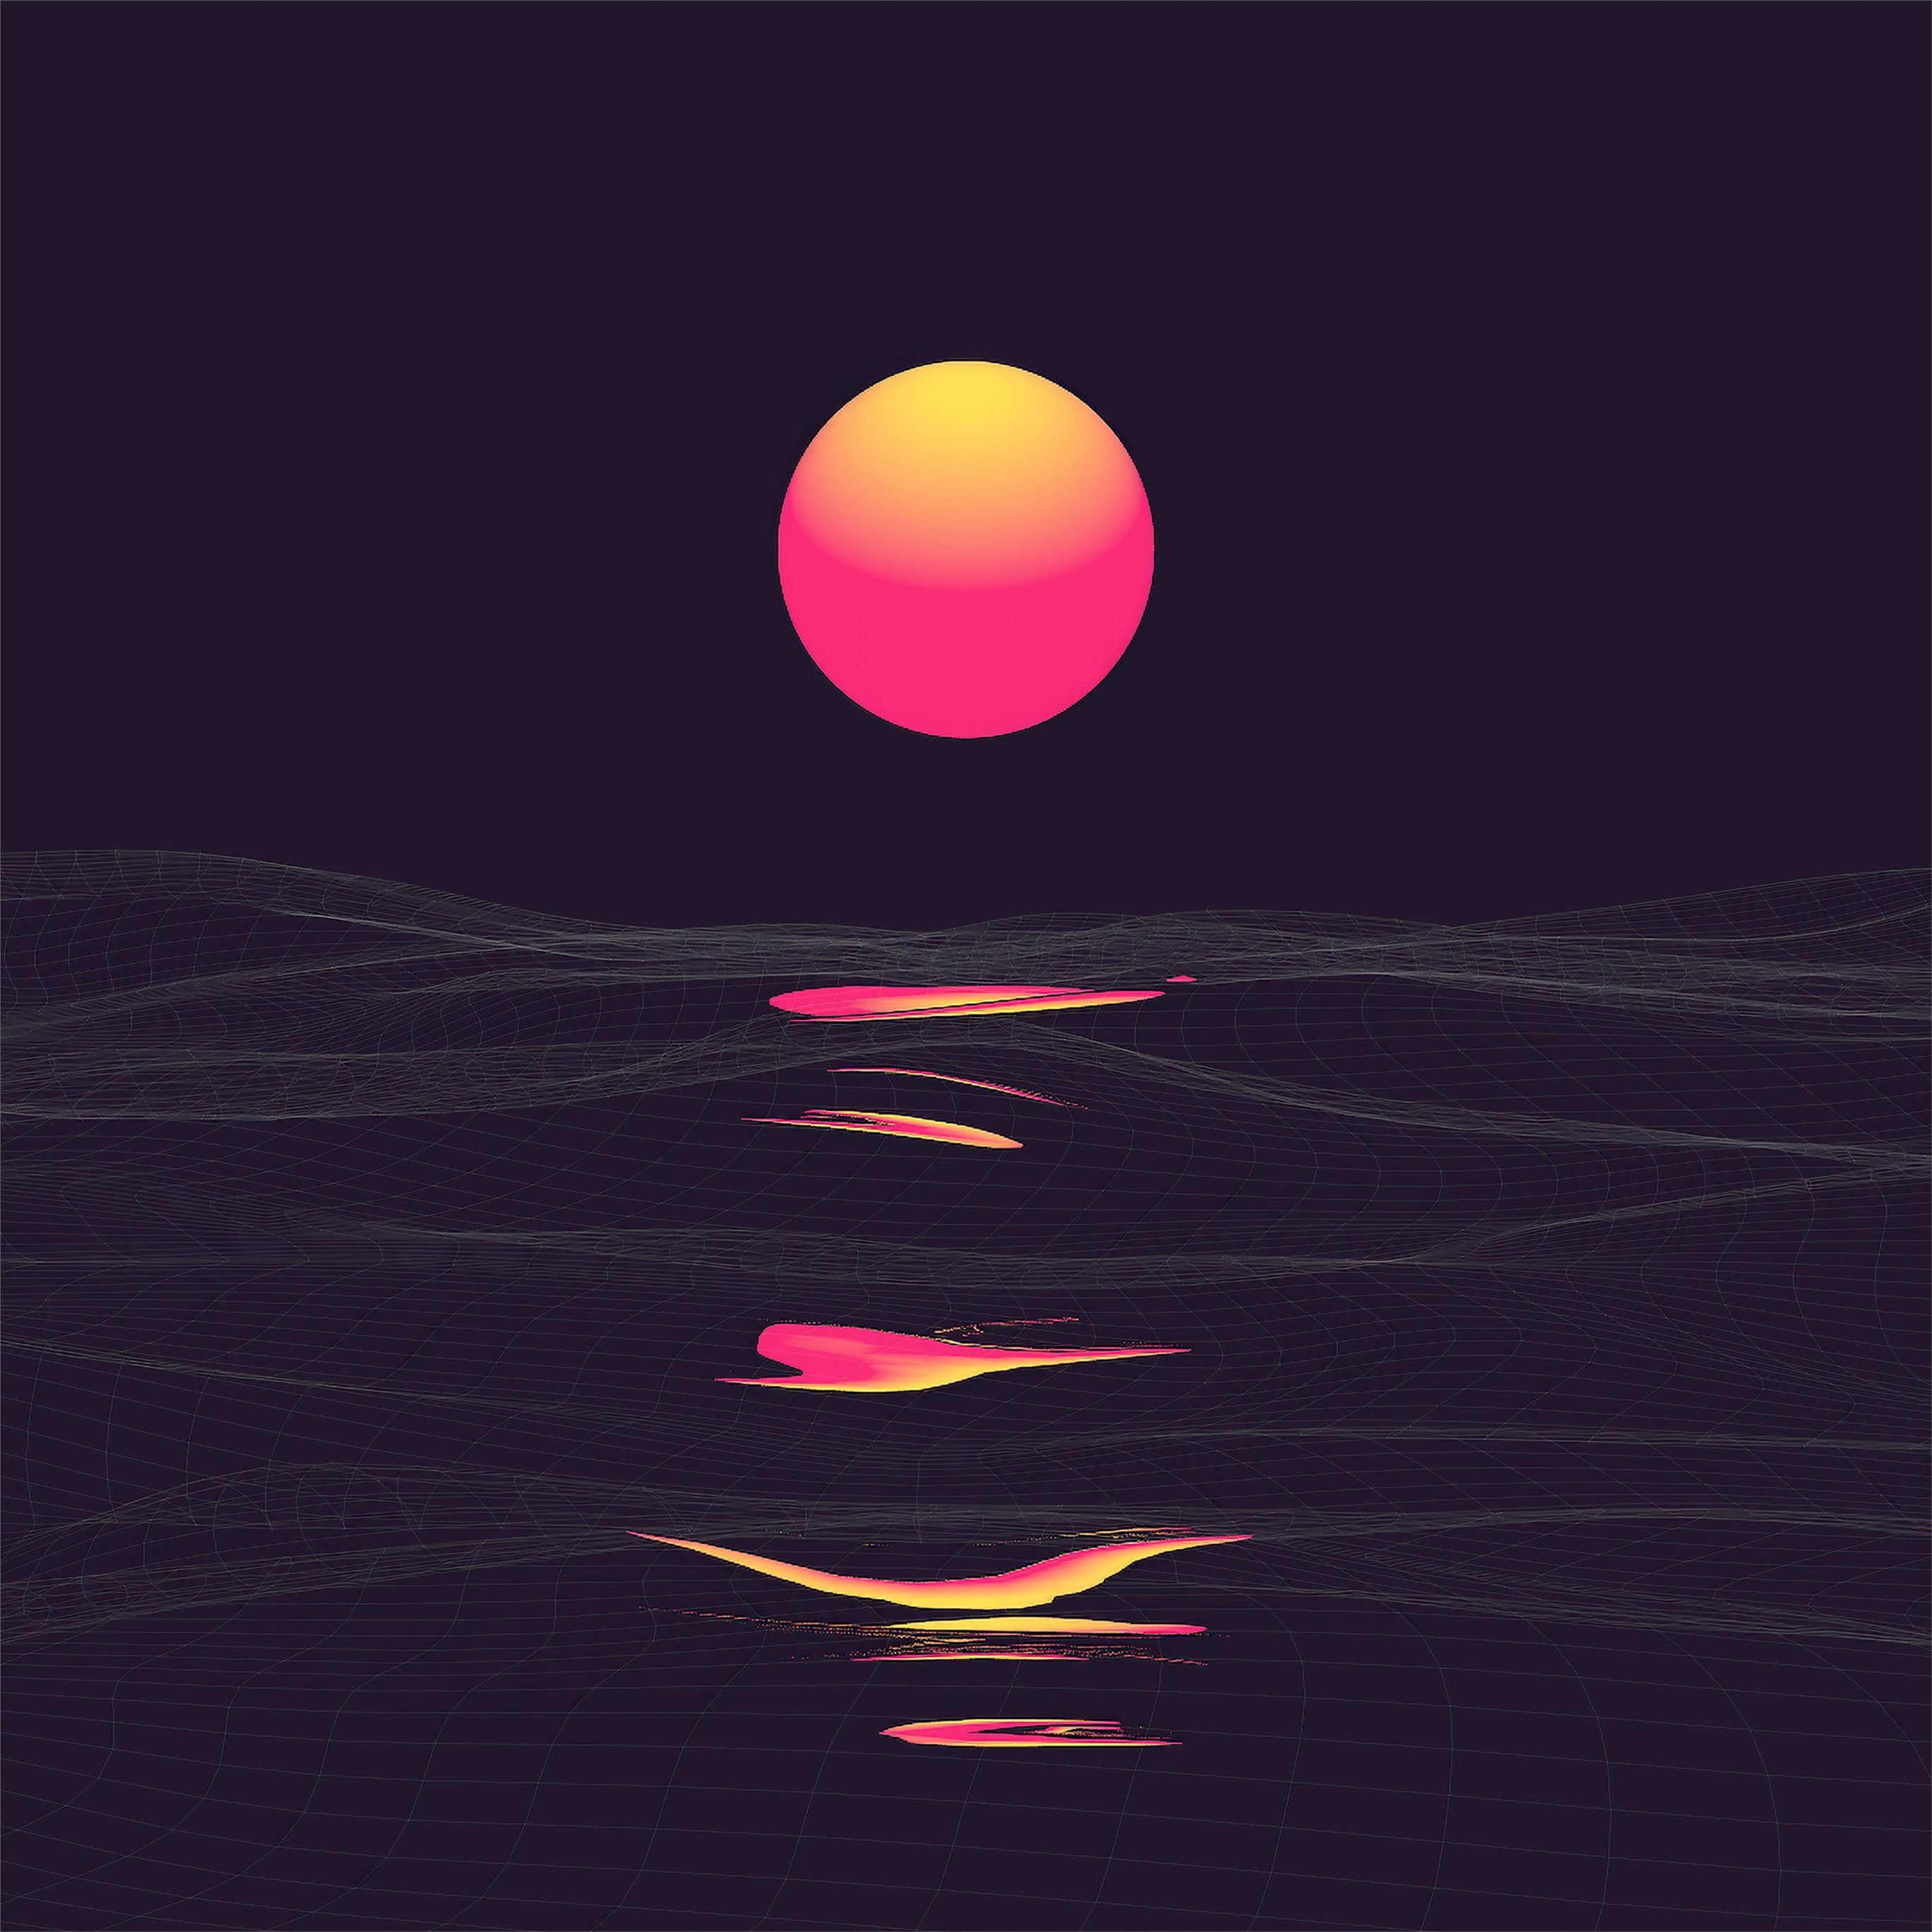 Retrowave Sunrise Reflection Clear Sky 4k Ipad Pro Wallpapers Free Download